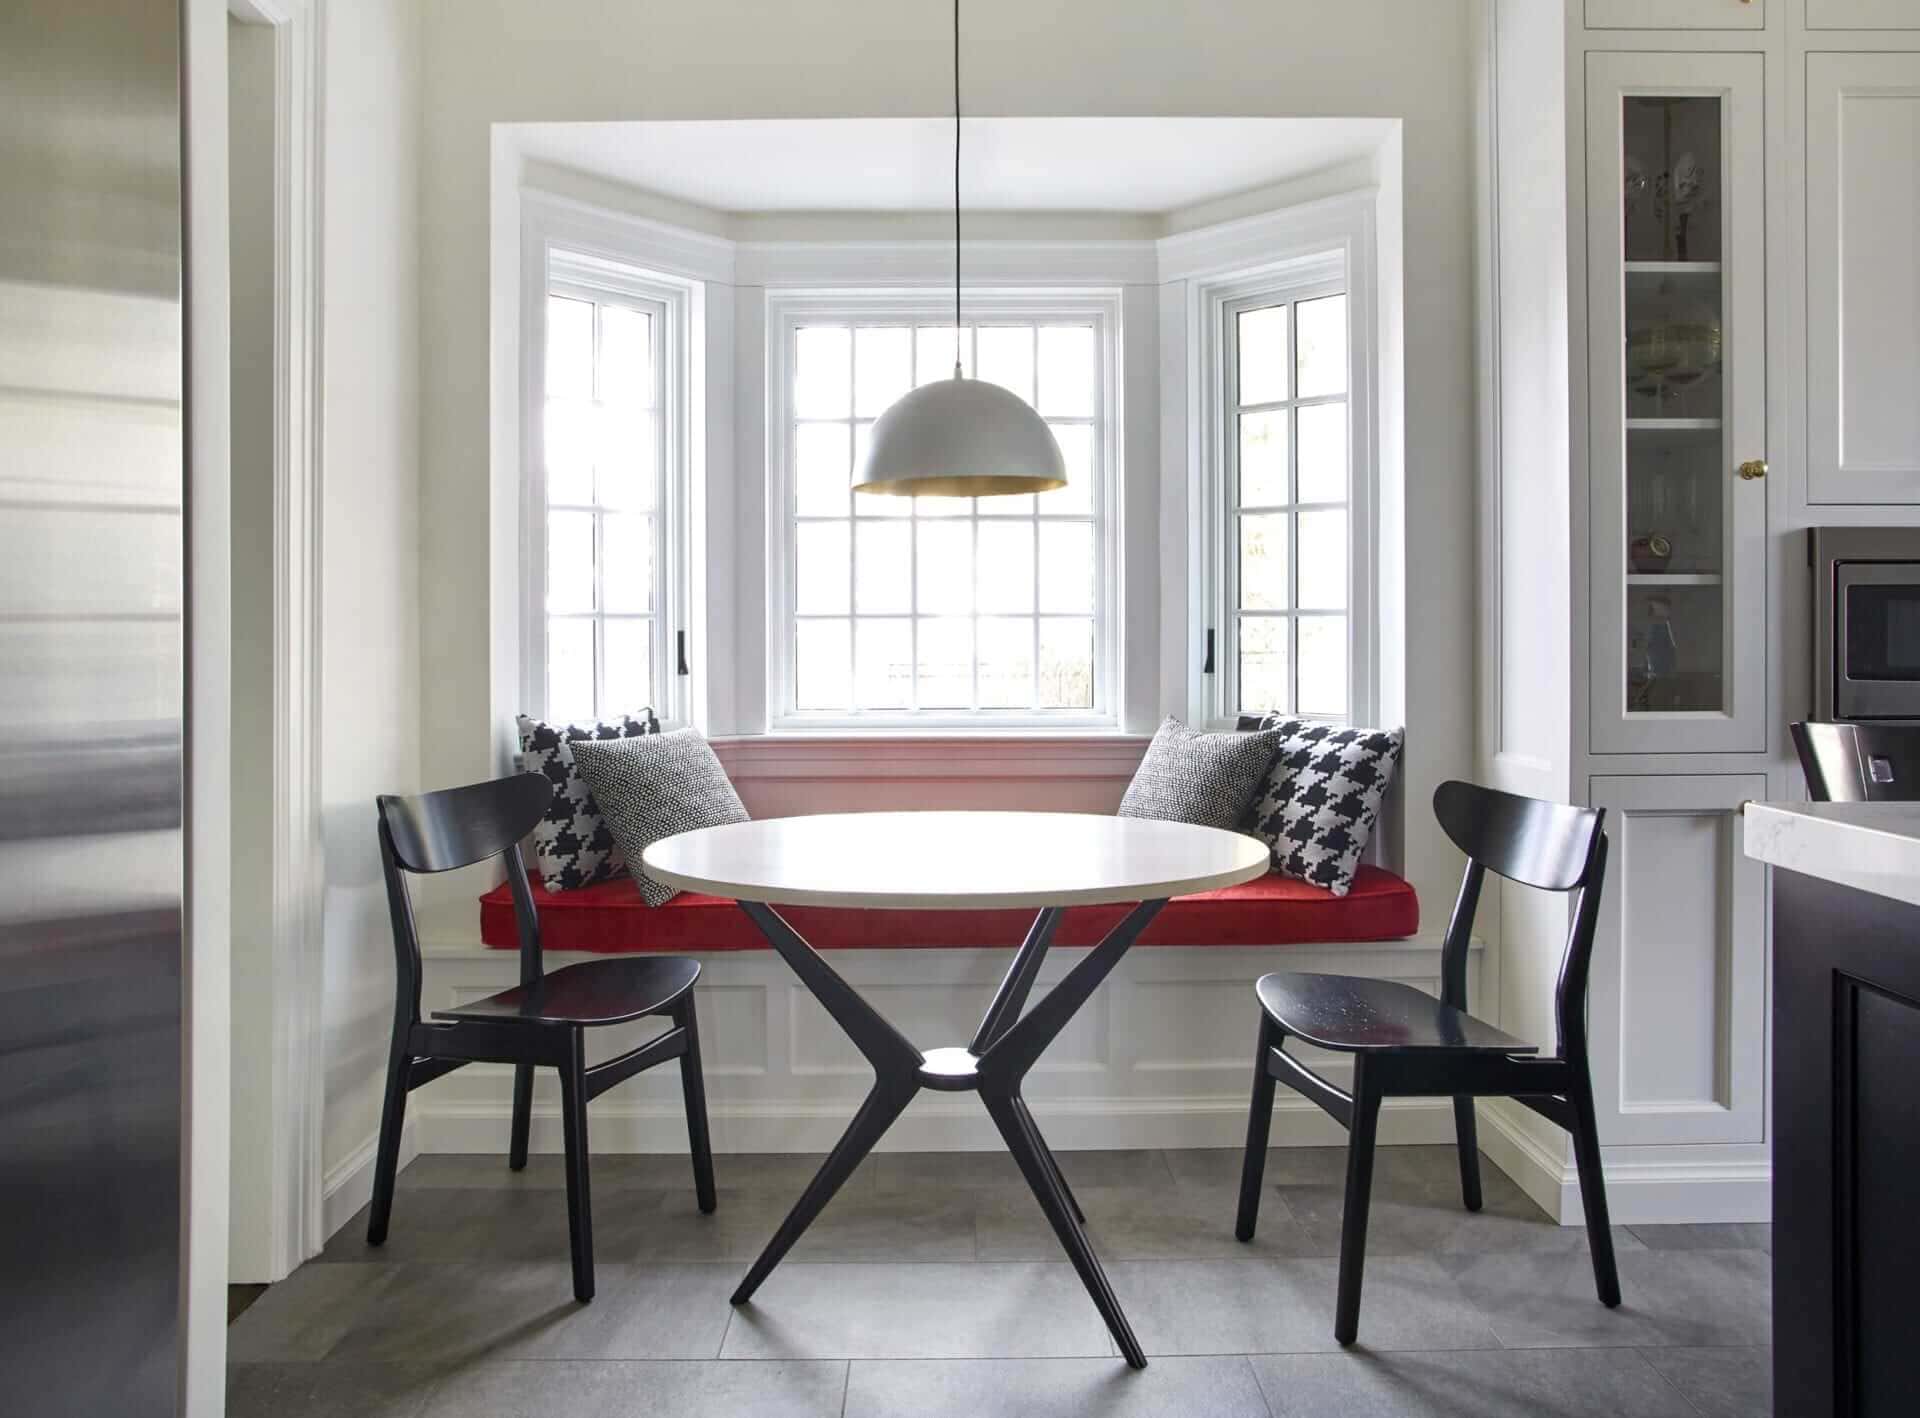 Art Deco inspired kitchen features custom window seat banquette with pendant light and marble bistro table.